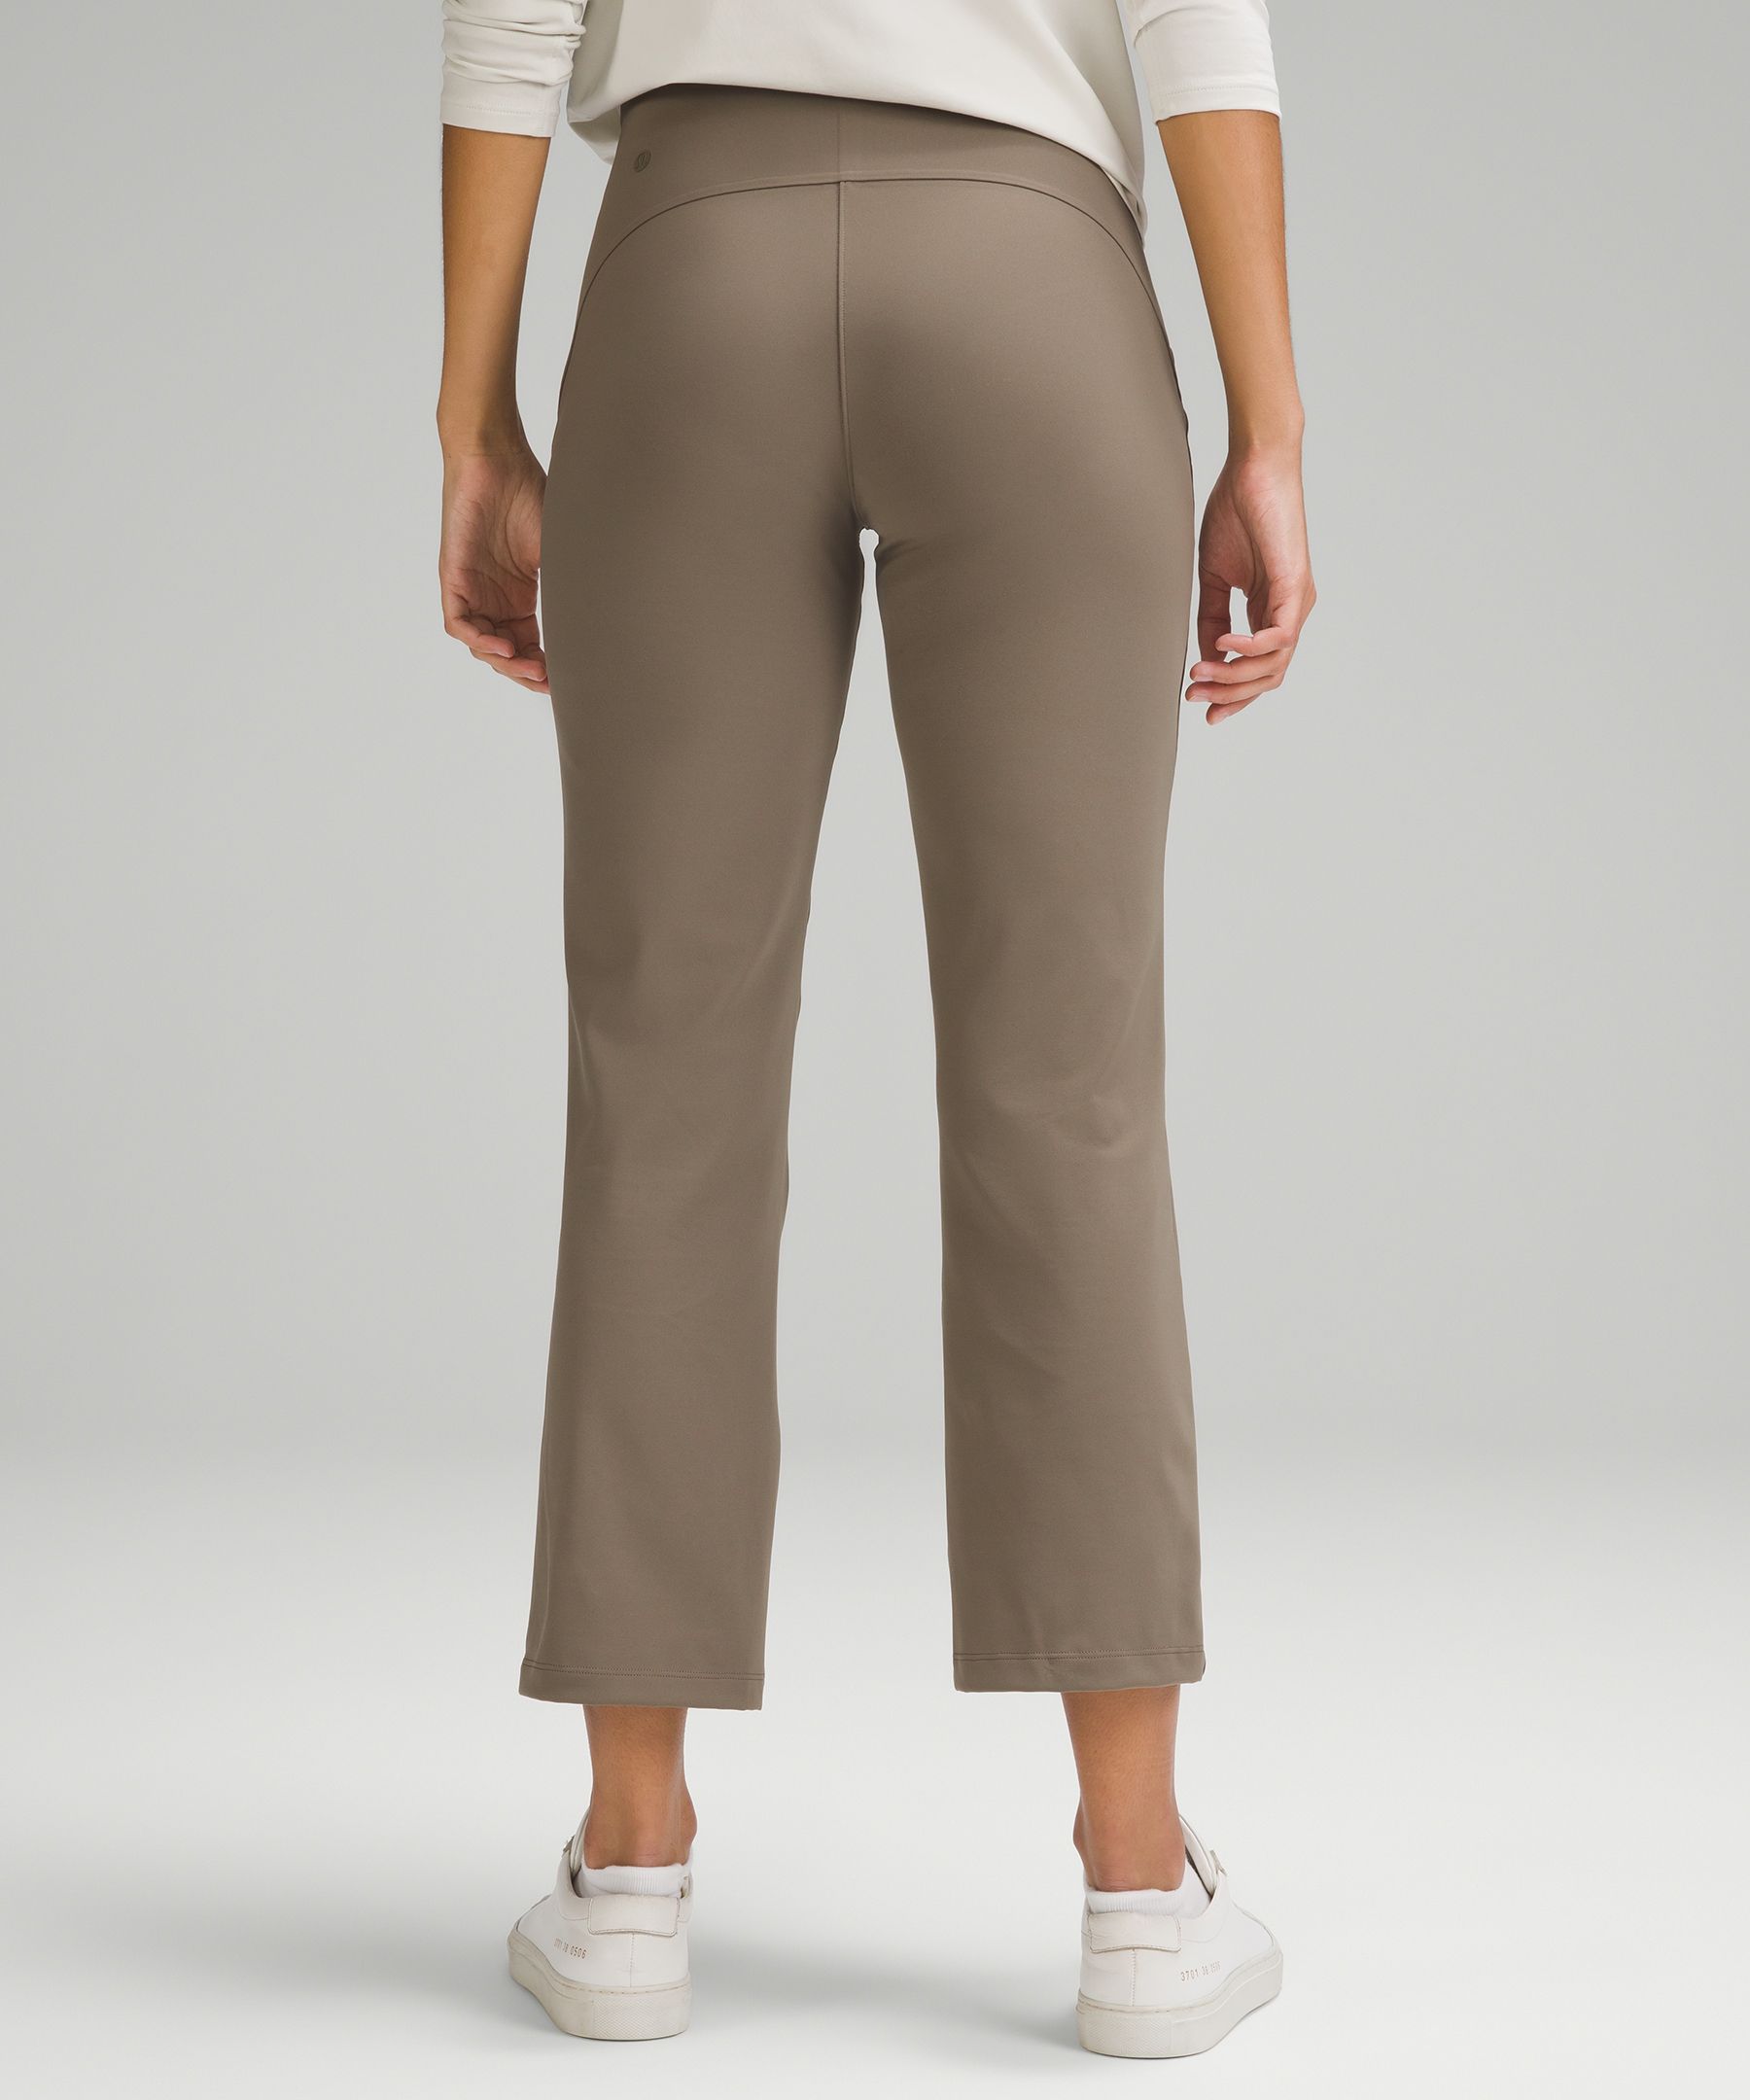 lululemon athletica Smooth Fit Pull-on High-rise Cropped Pants in Natural